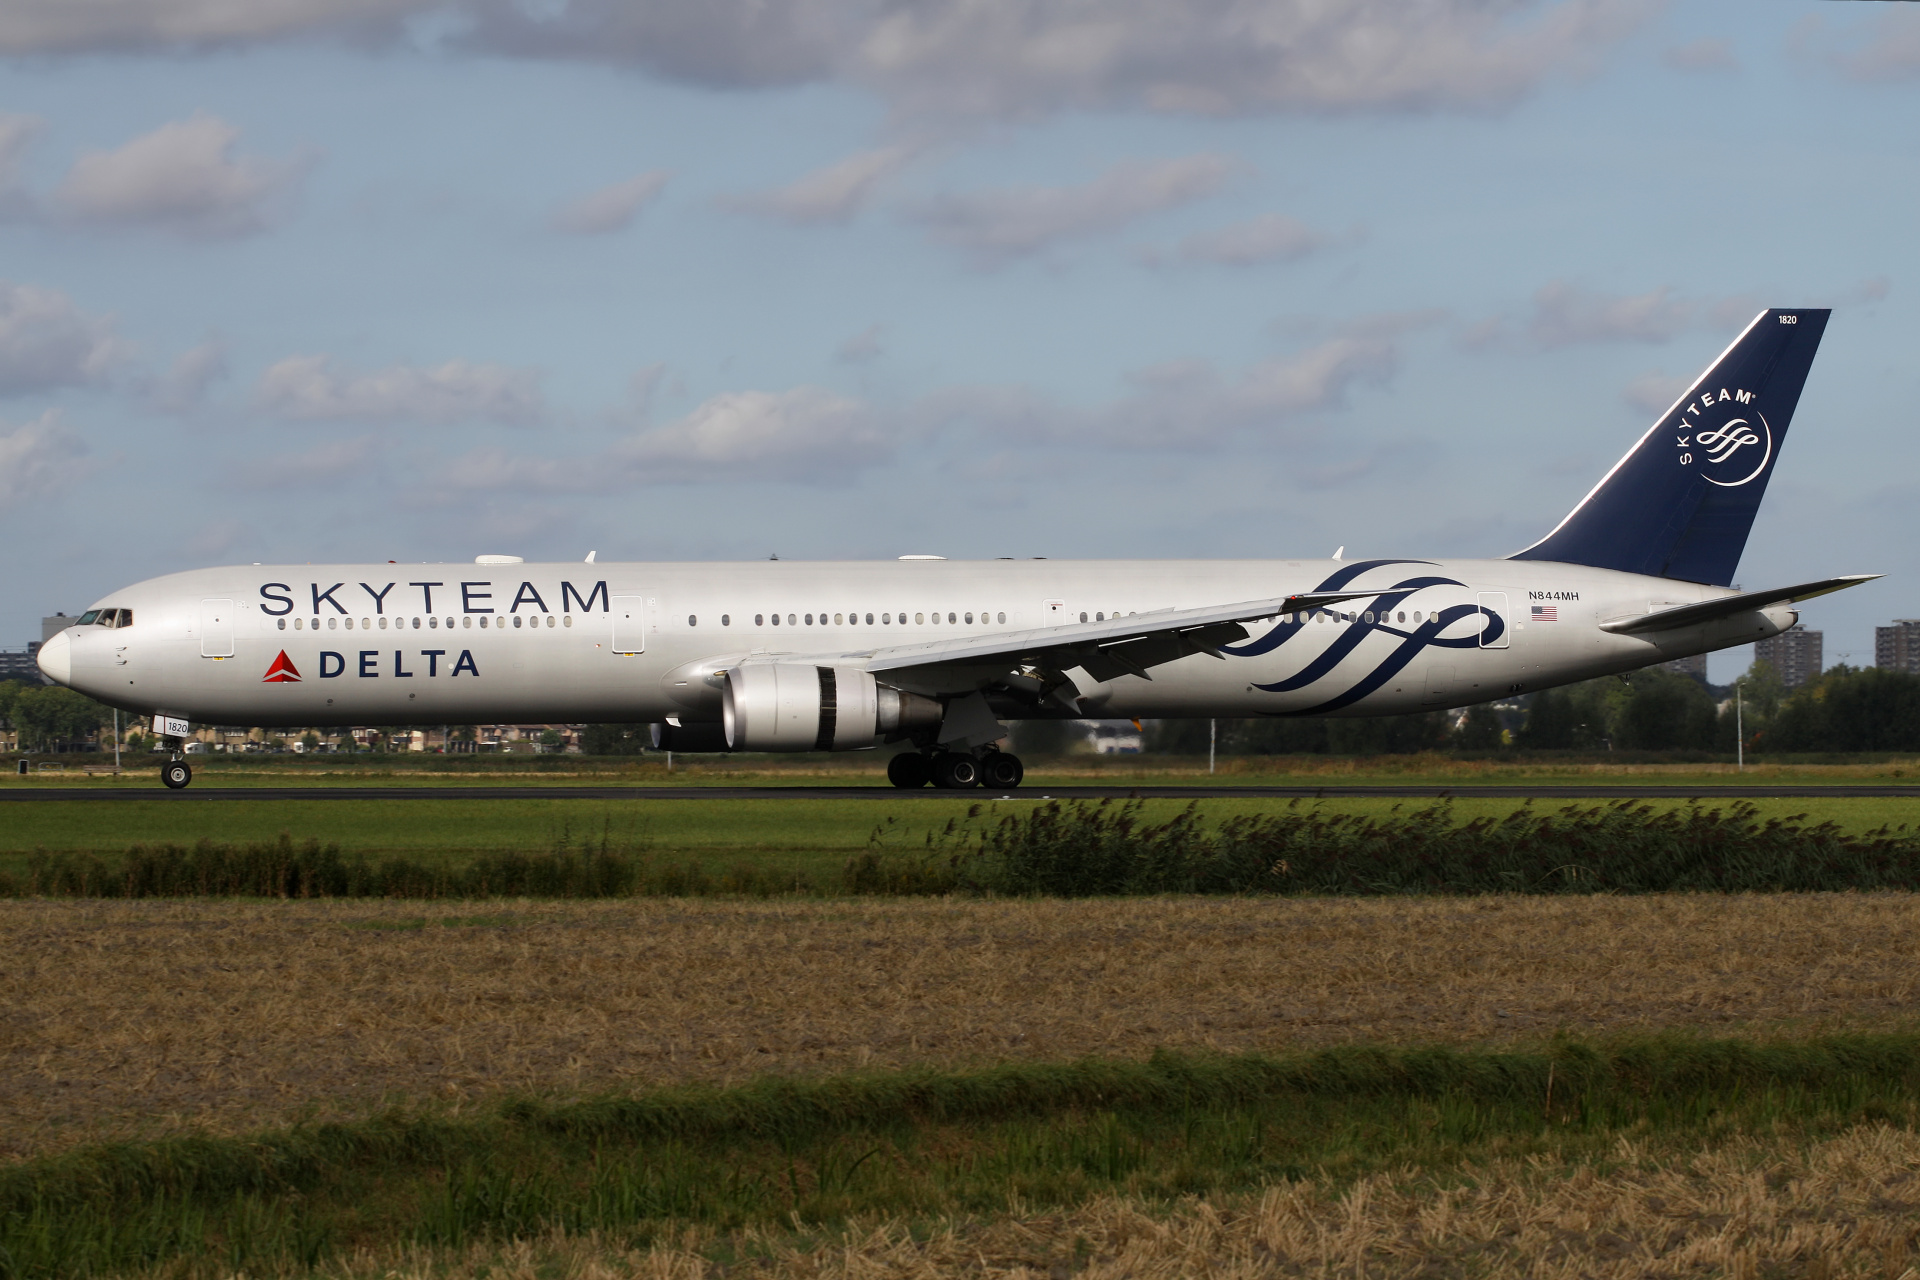 N844MH, Delta Airlines (SkyTeam livery) (Aircraft » Schiphol Spotting » Boeing 767-400)